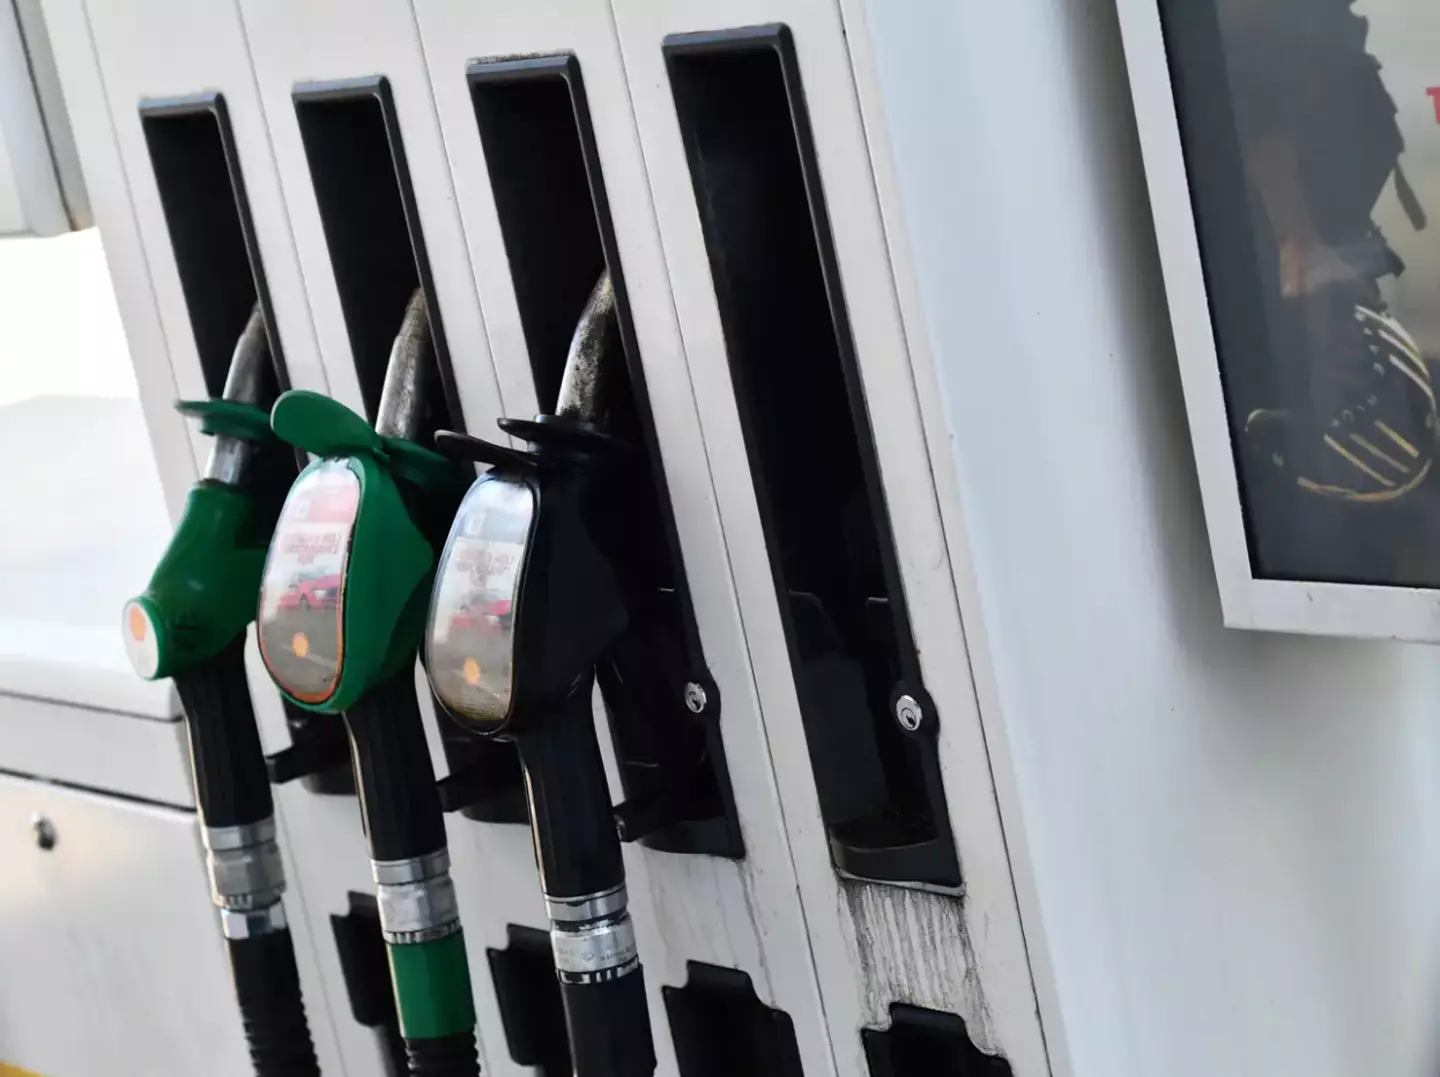 Petrol prices have reached record highs in just the last week (